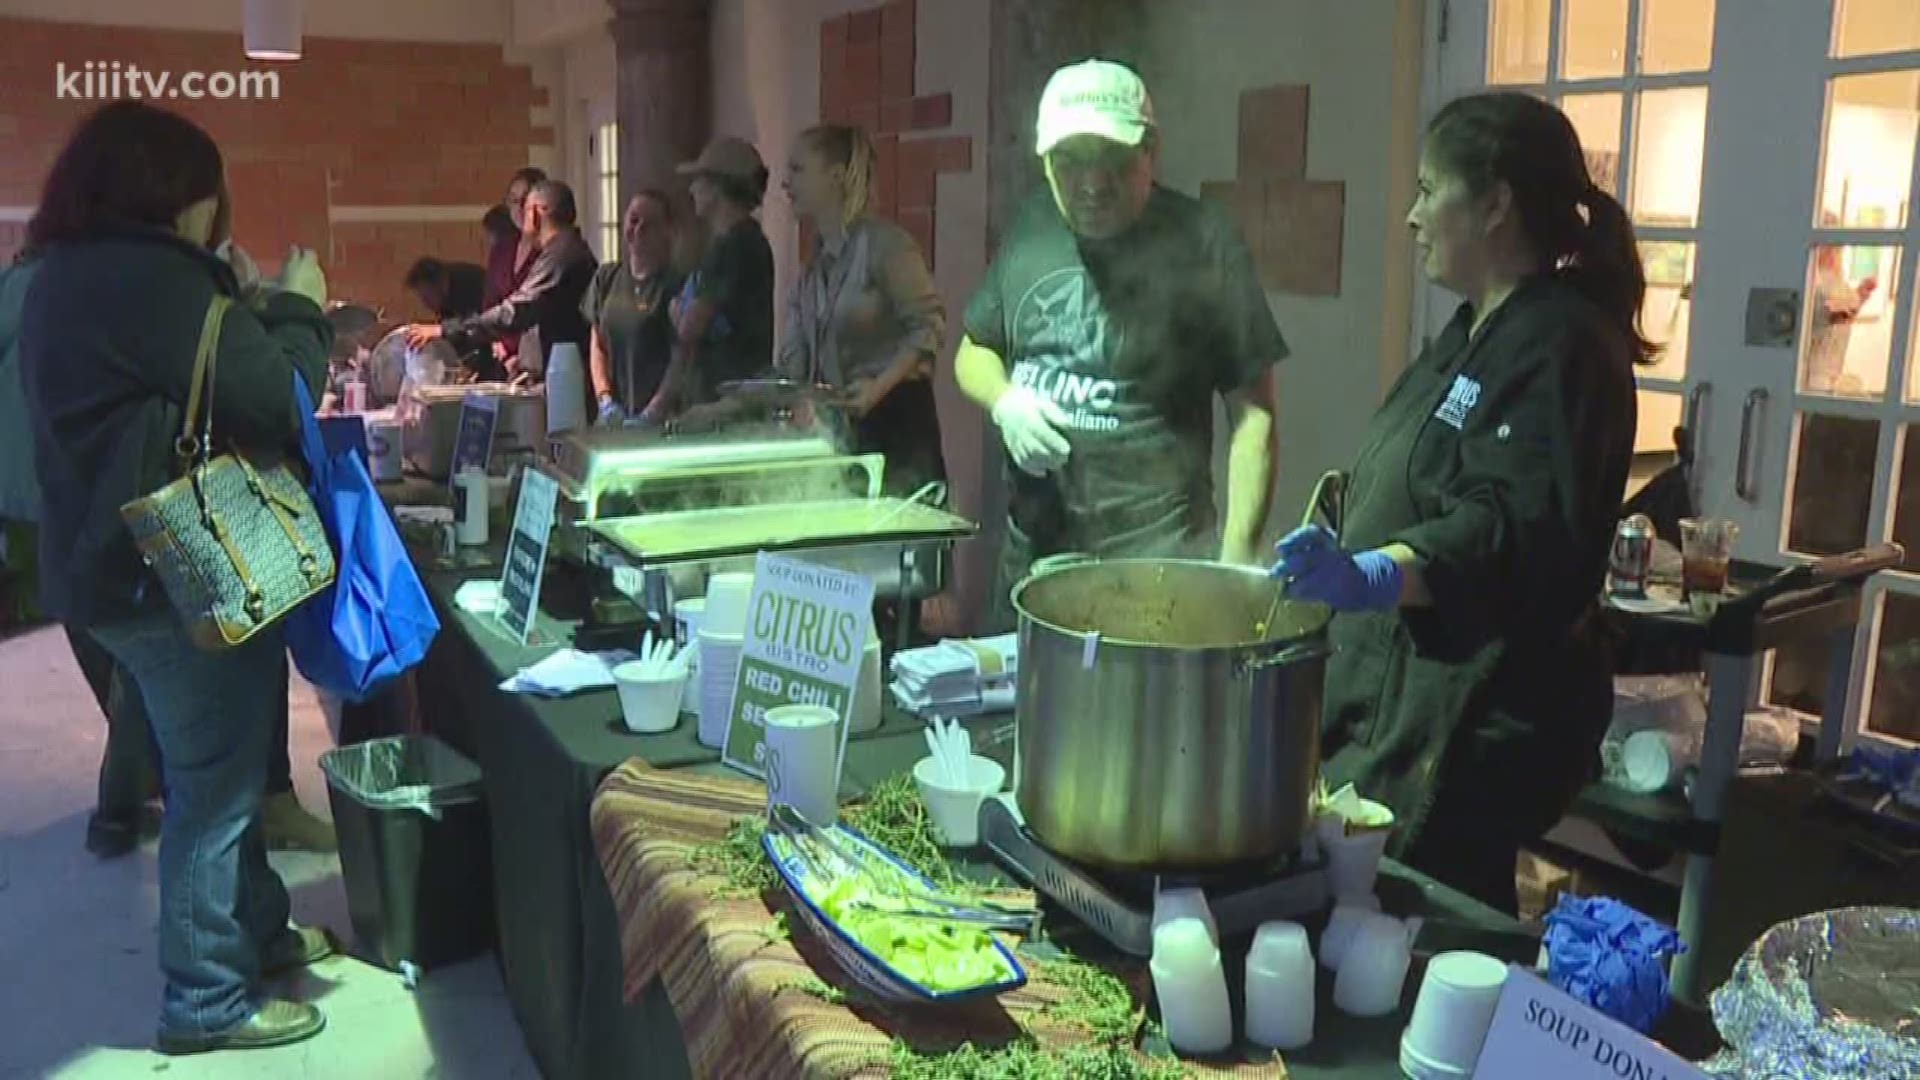 Tickets went on sale Thursday for the Souper Bowl, a fundraiser for the Coastal Bend Food Bank.